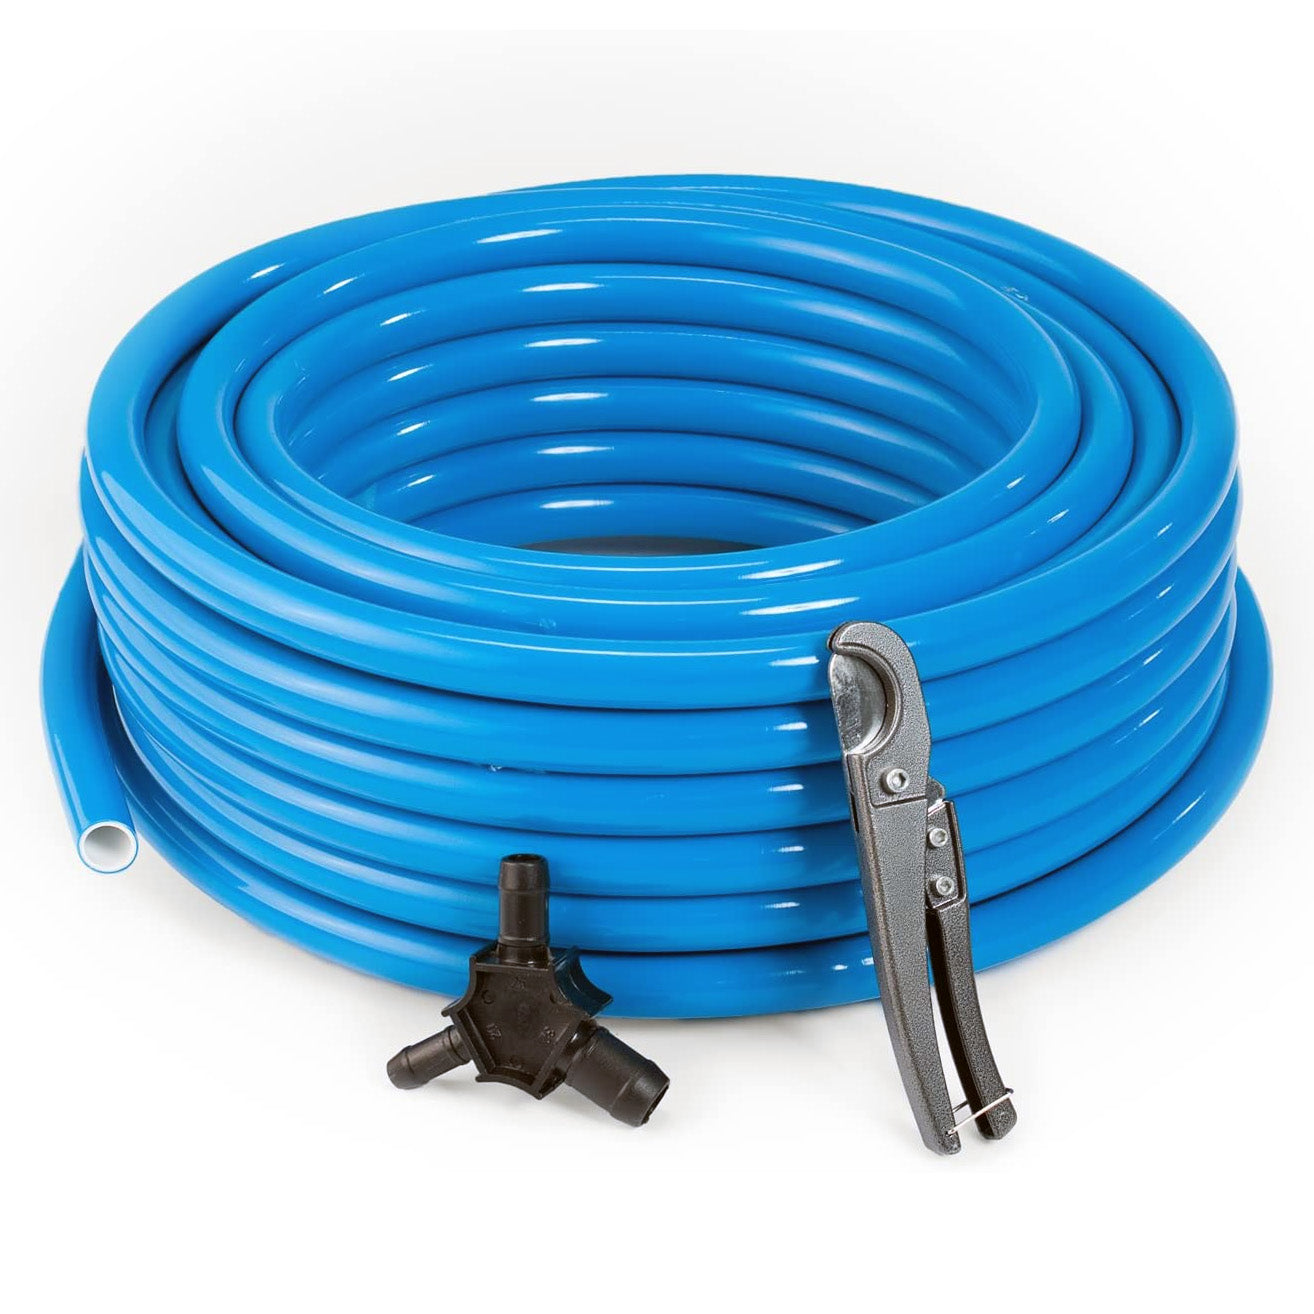 Maxline 1/2" Tubing 300 Ft Compressed Air Piping System Kit Aluminum Core M6027